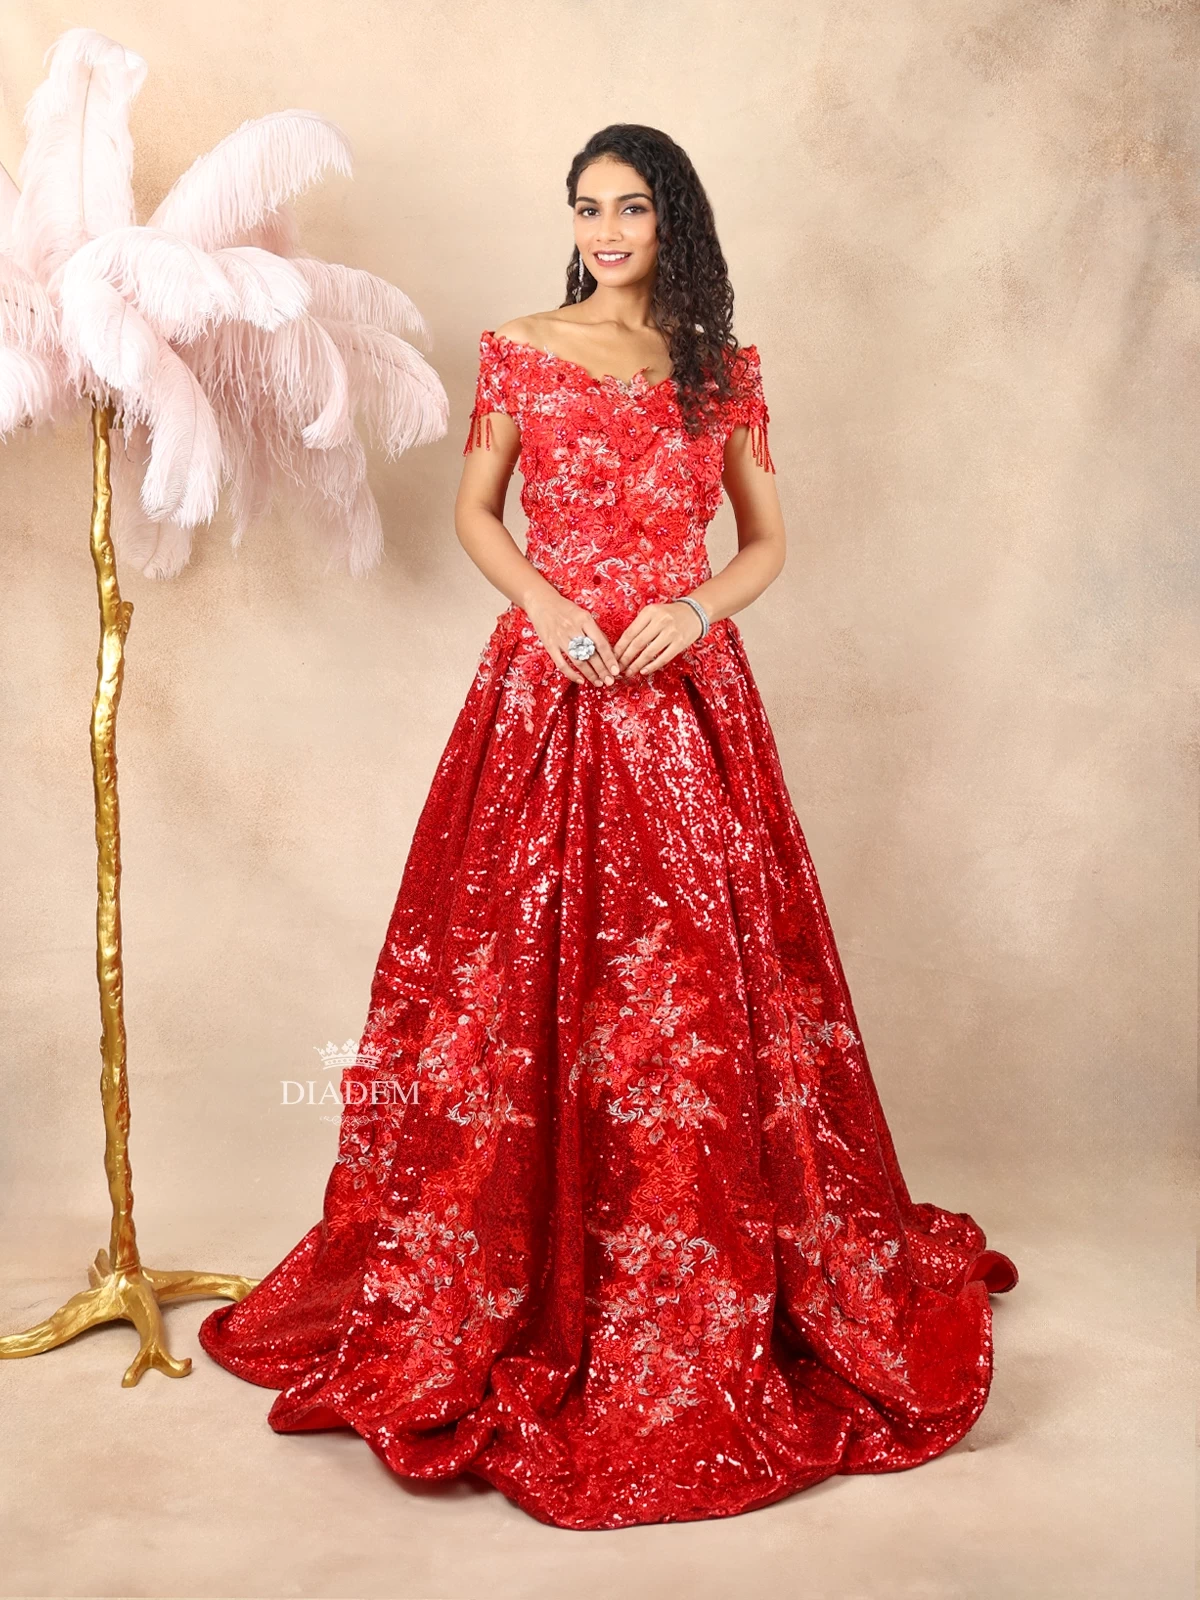 Red Ball Gown Embellished With Sequins And 3d Flowers